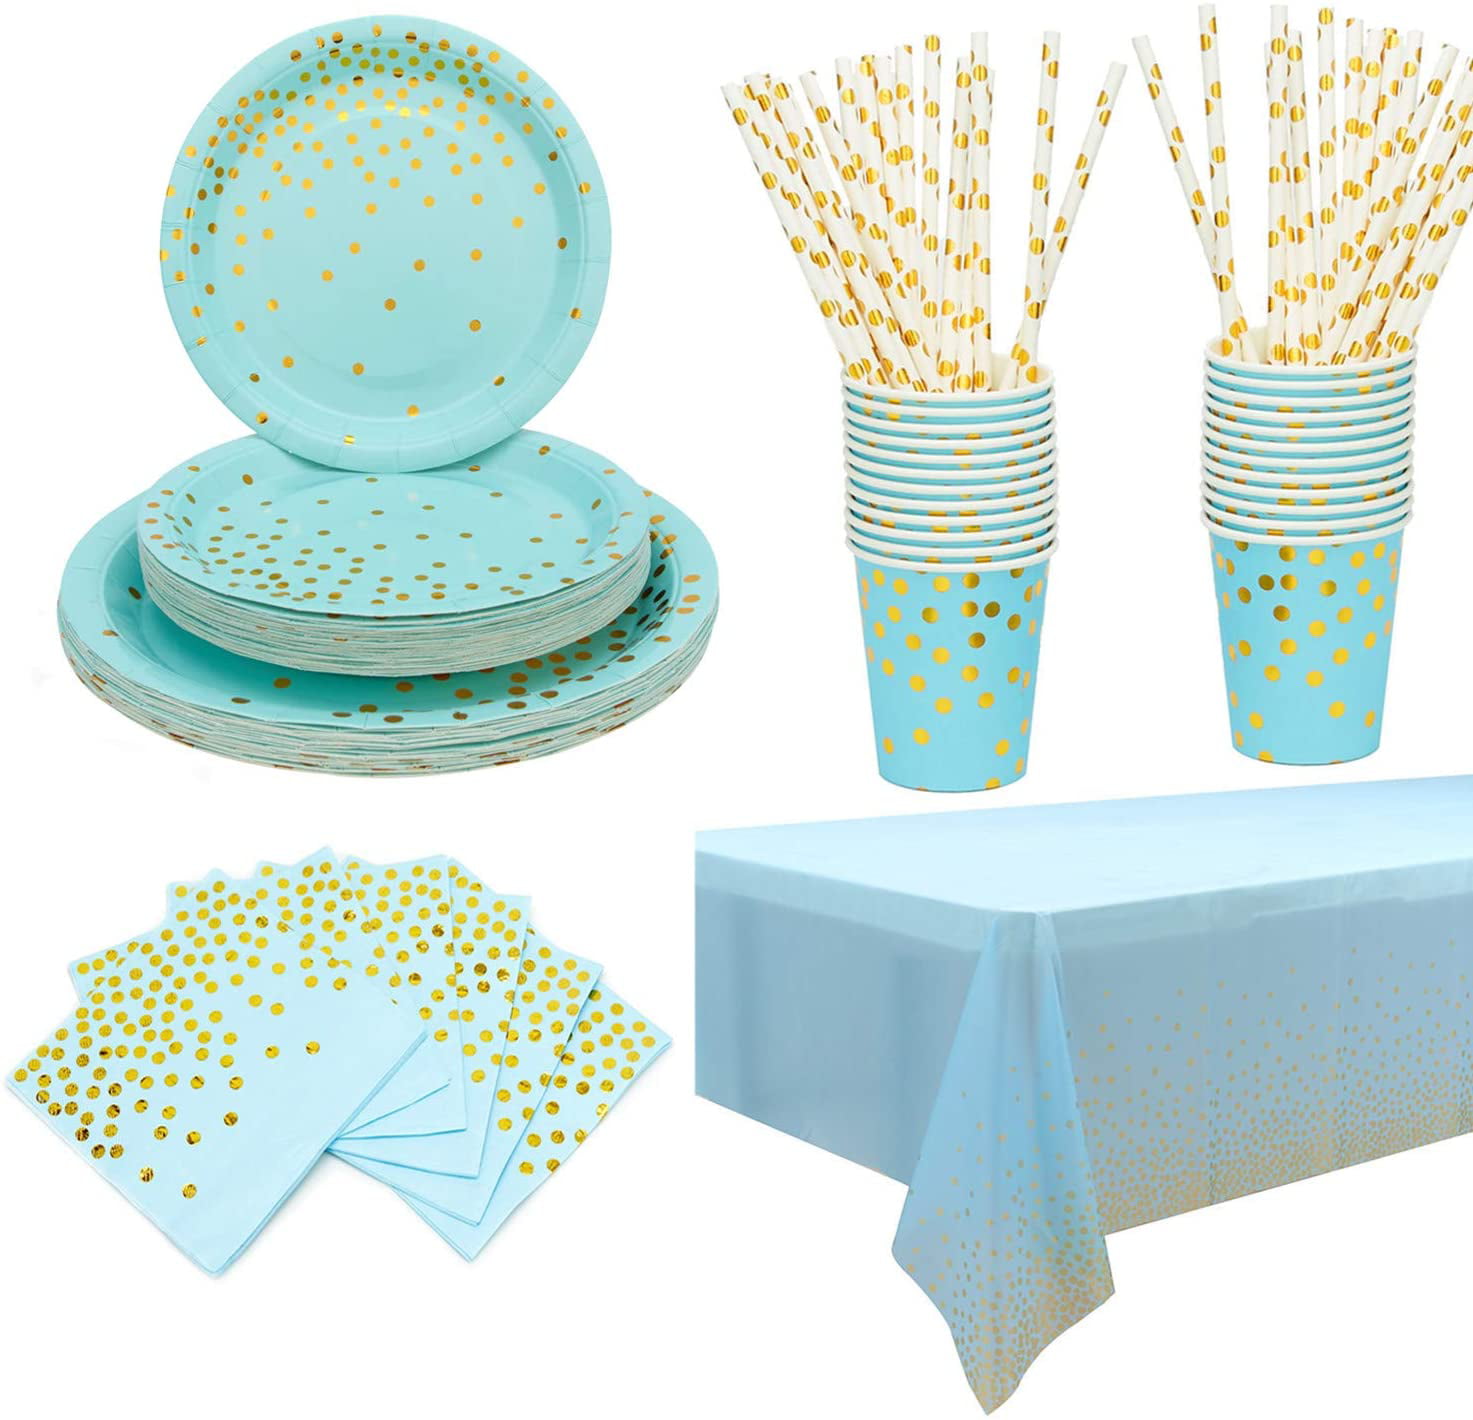 7 Inch Plates Wedding Graduation 20 Cups and 20 Napkins 80pcs Blue with Gold Foil Dots Disposable Paper Party Set Including 9 Inch Paper Plates Used for Birthday Party Blue Party Tableware Kit